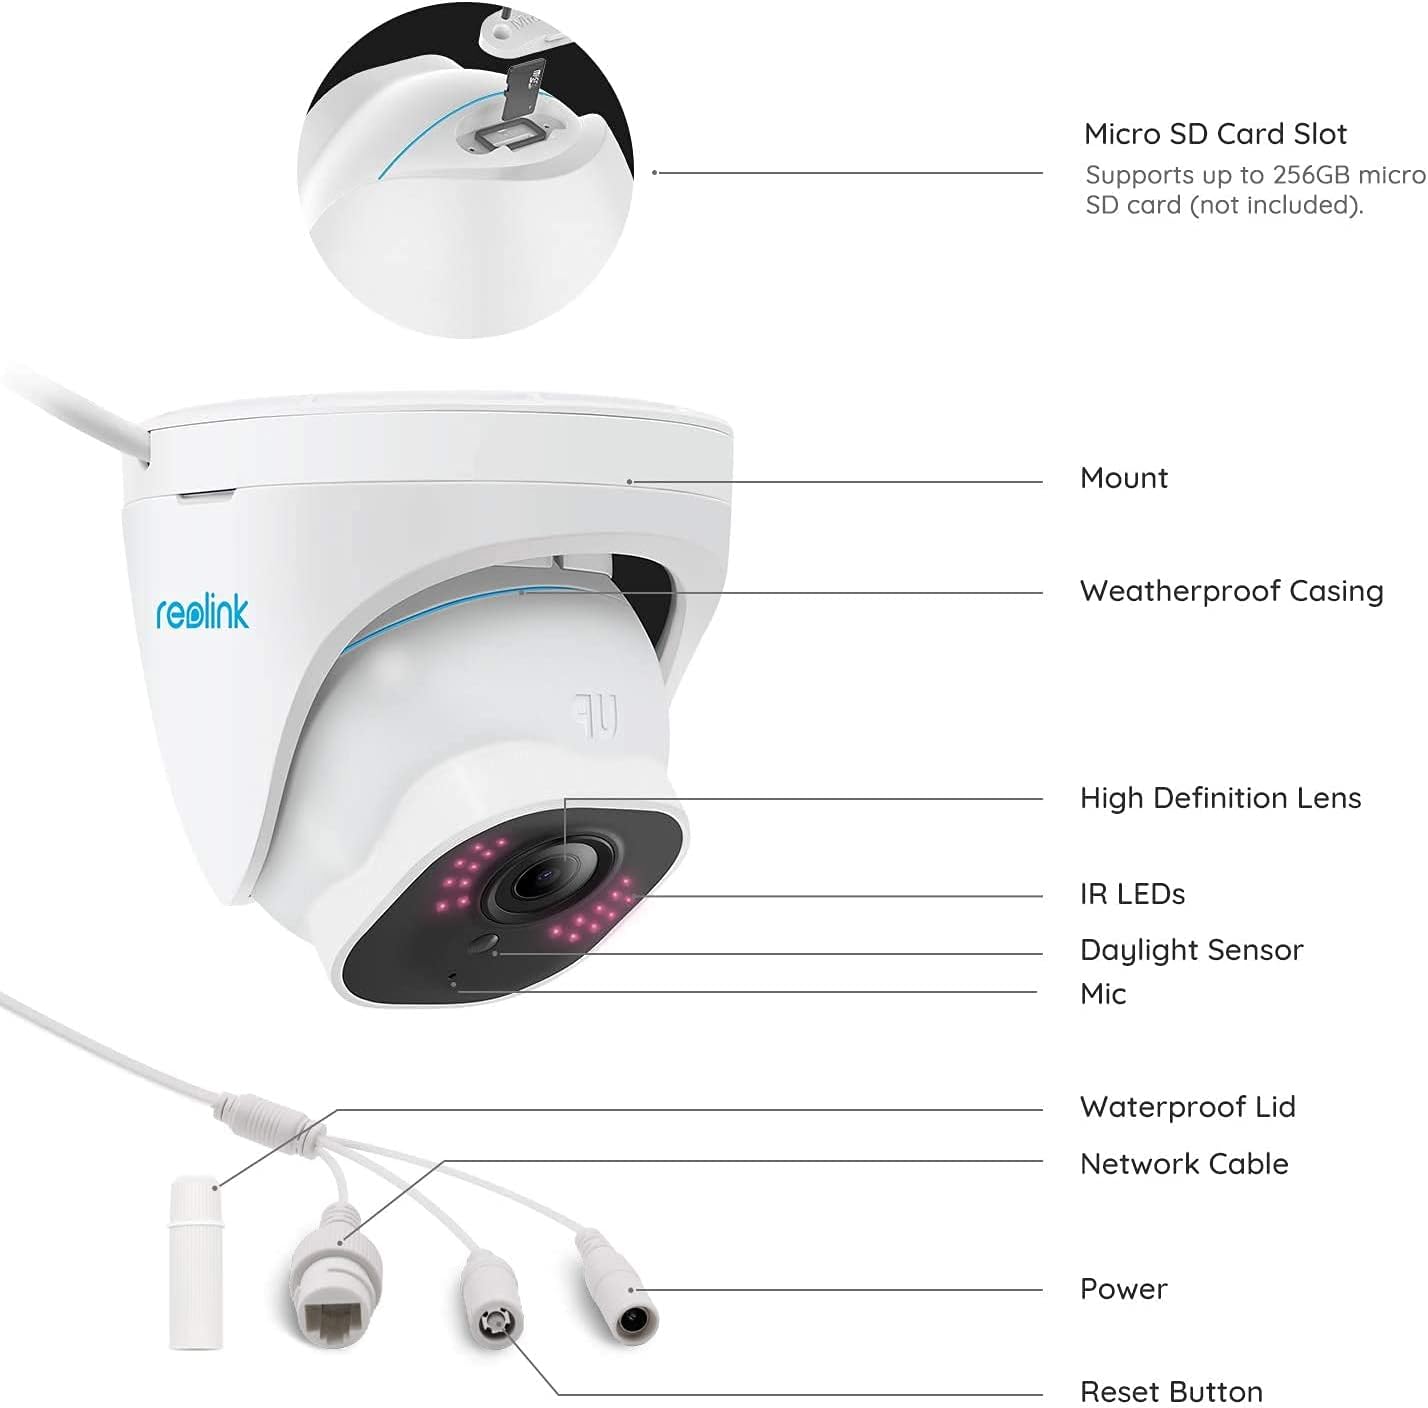 REOLINK RLC-822A Video Surveillance Camera: High-Resolution 4K (3840 x 2160) - 25fps, Adjustable Lens 96°-27°, Night Vision Range up to 30m, Built-in Microphone, Motion Detection with Human and Vehicle Detection, Free Phone App Included - Spy-shop.com